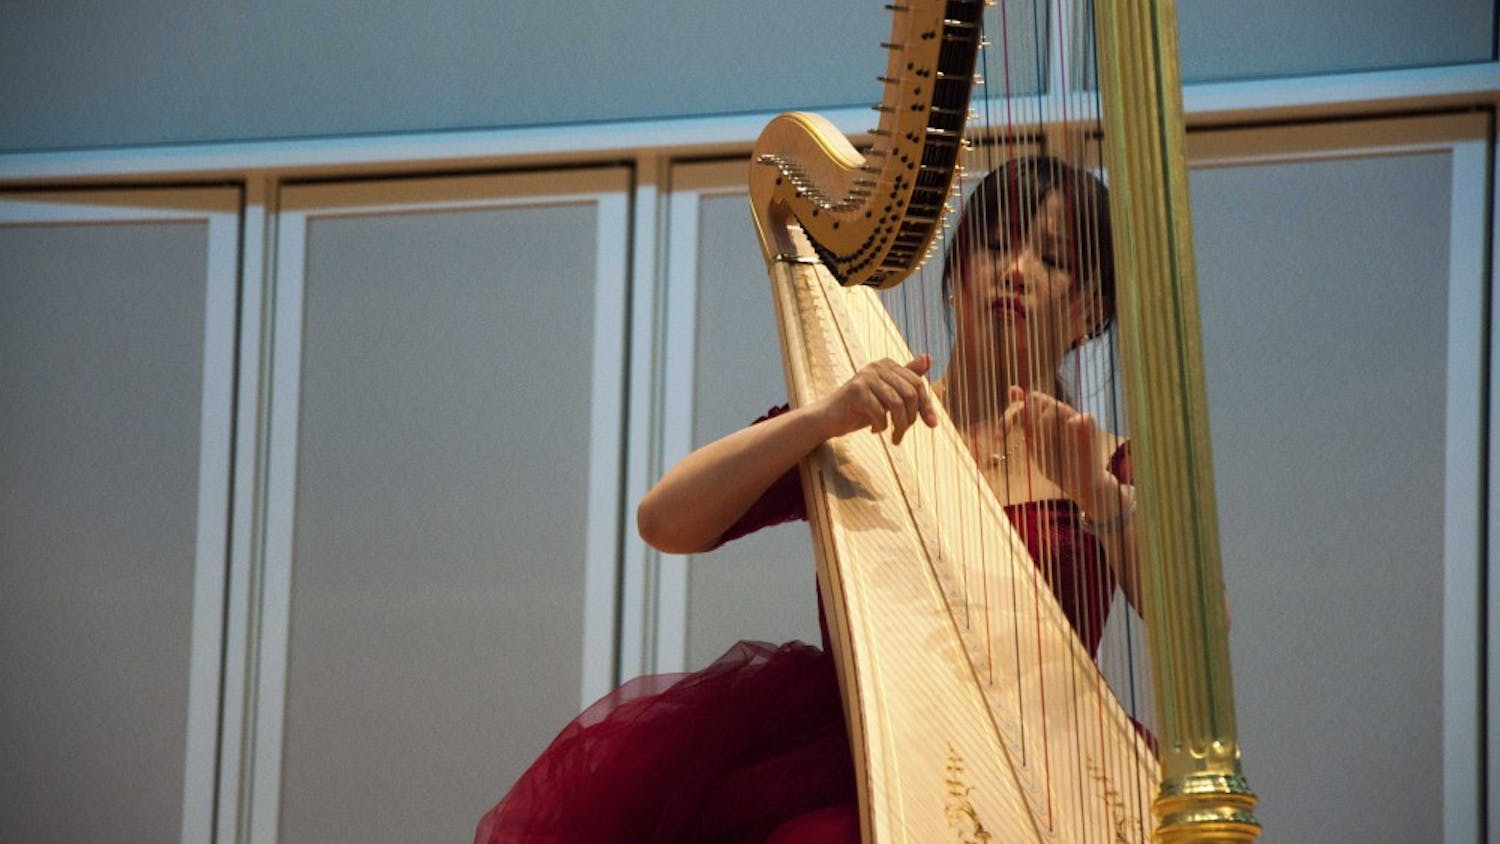 Yuying Chen, the 2015 First Prize Winner of the 19th Israel International Harp Contest, performs duringthe 10th USA International Harp Competition on Sunday afternoon at Indiana University Jacobs School of Music.